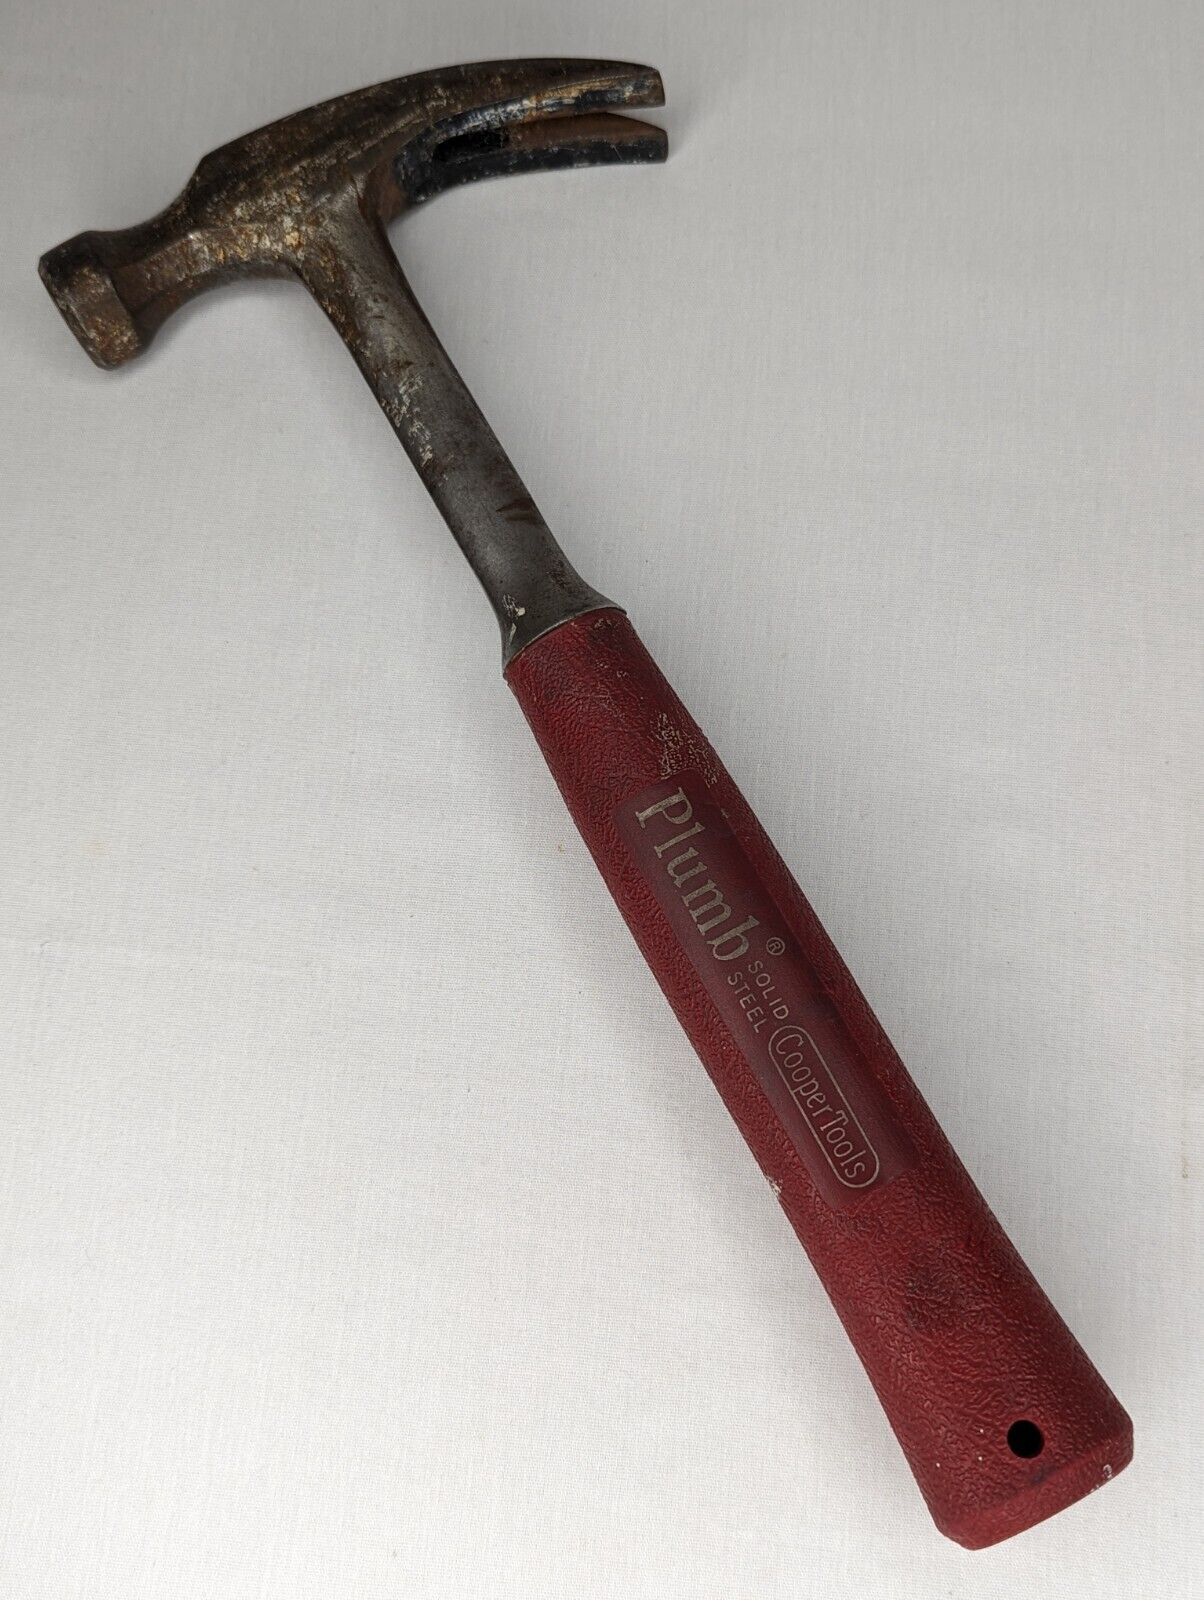 Vintage Plumb Solid Steel Straight Claw Hammer with Red Grip